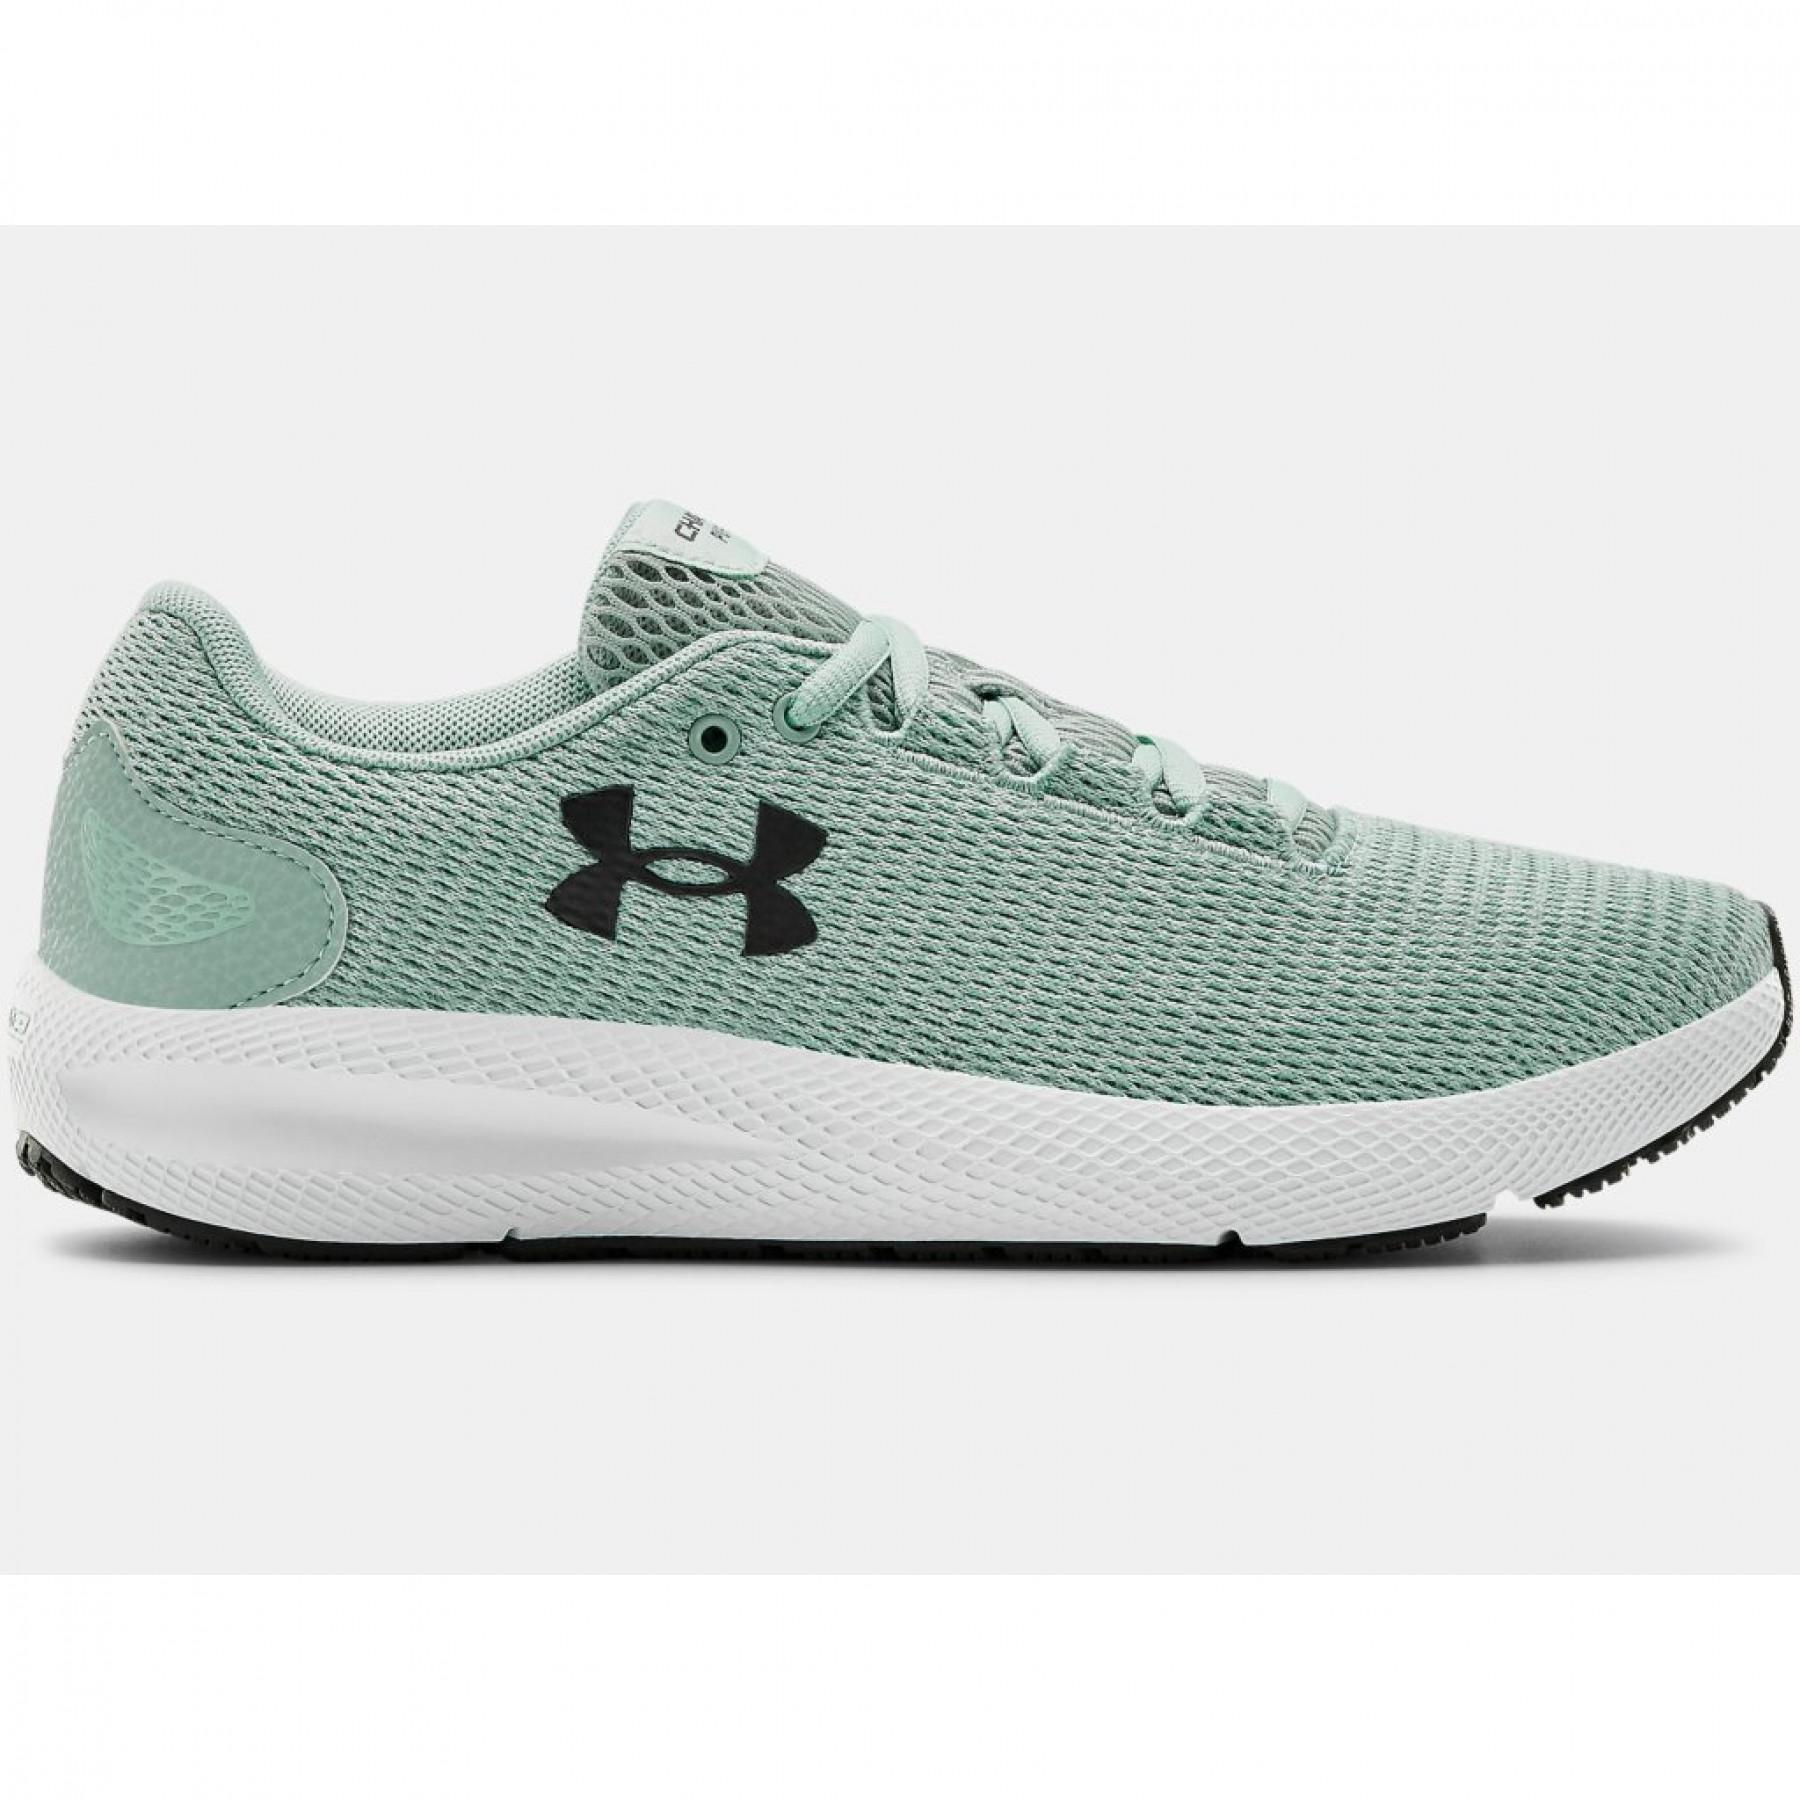 Buty damskie Under Armour Charged Pursuit 2 Twist